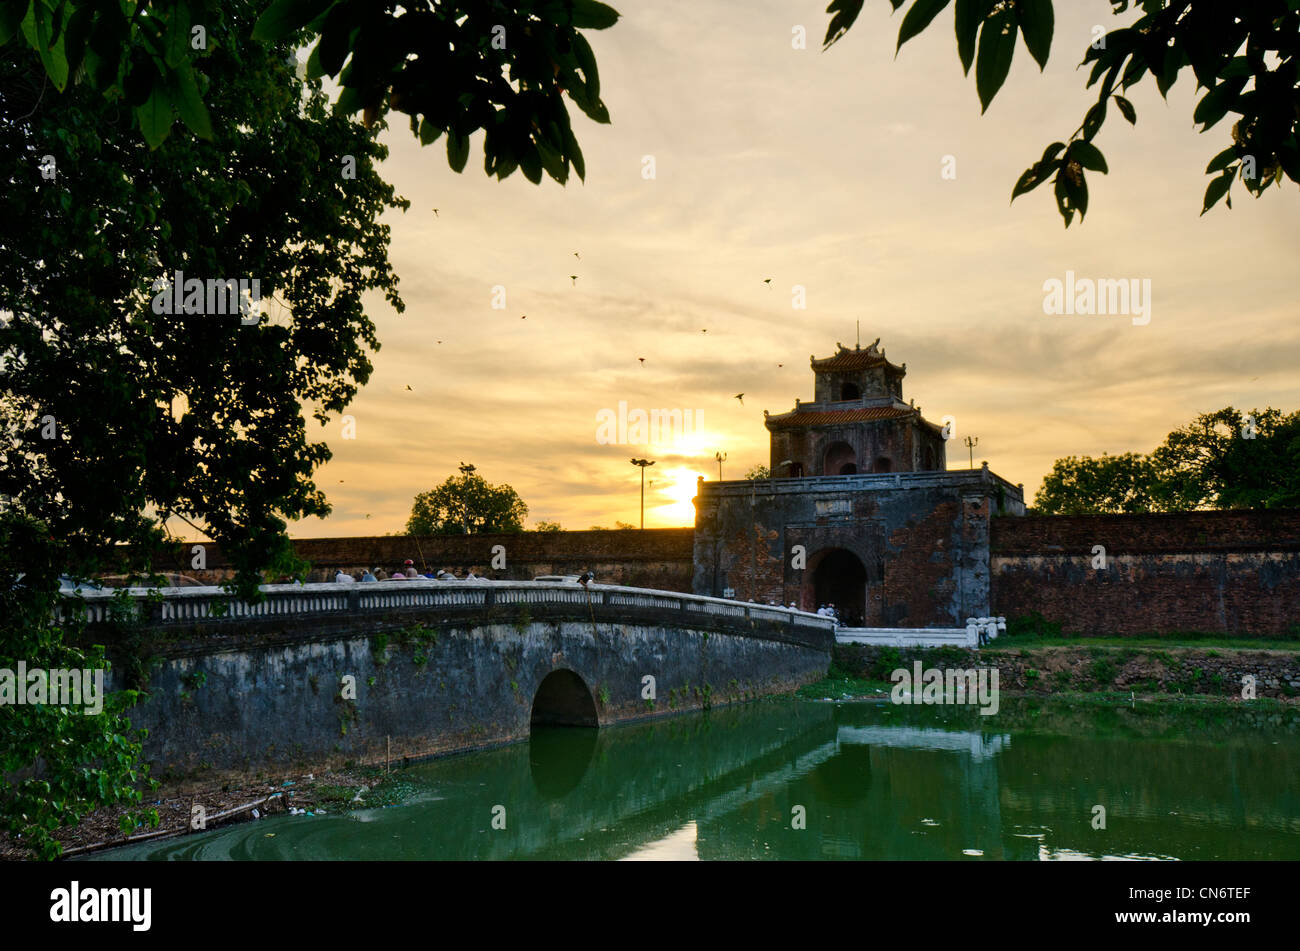 Entrance to Imperial City, Hue, Vietnam at Sunset Stock Photo